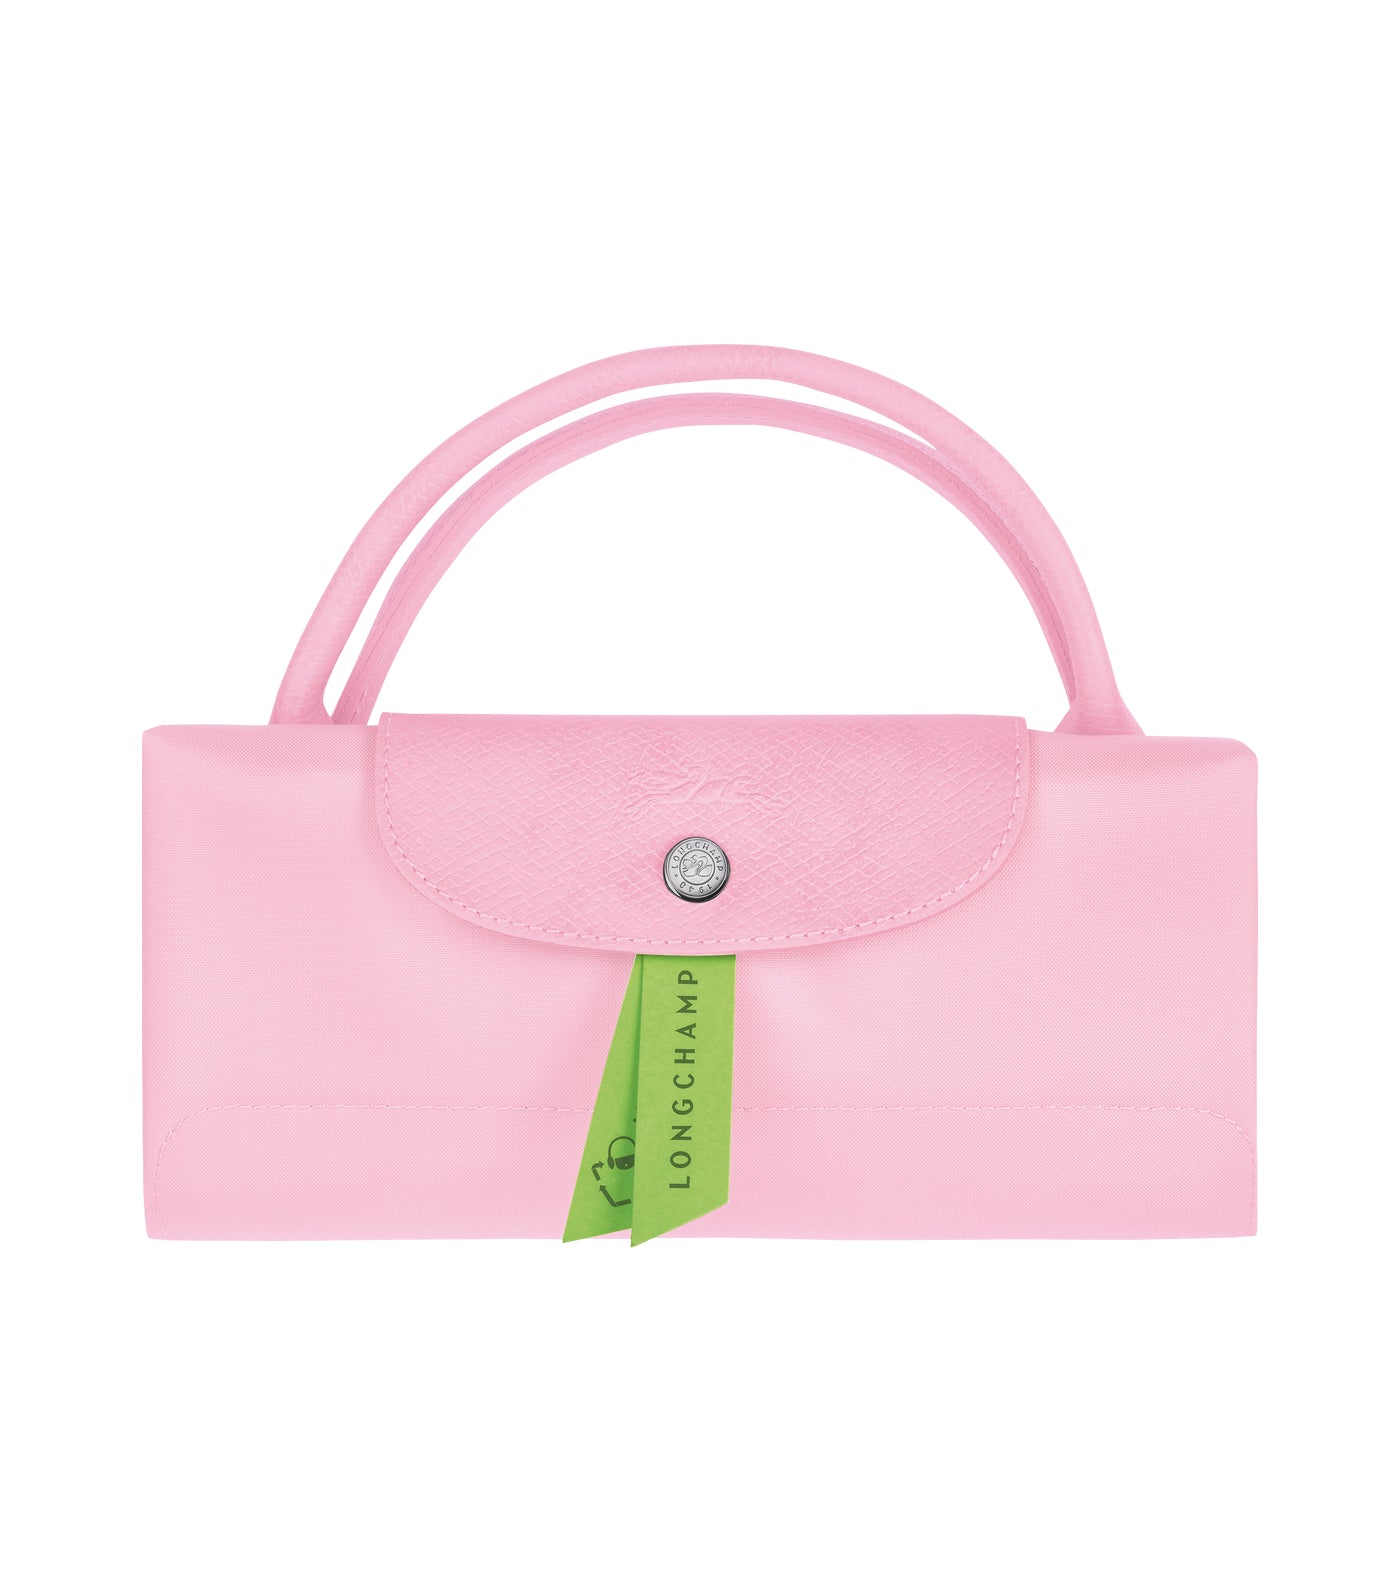 Le Pliage Green Travel Bag S Pink